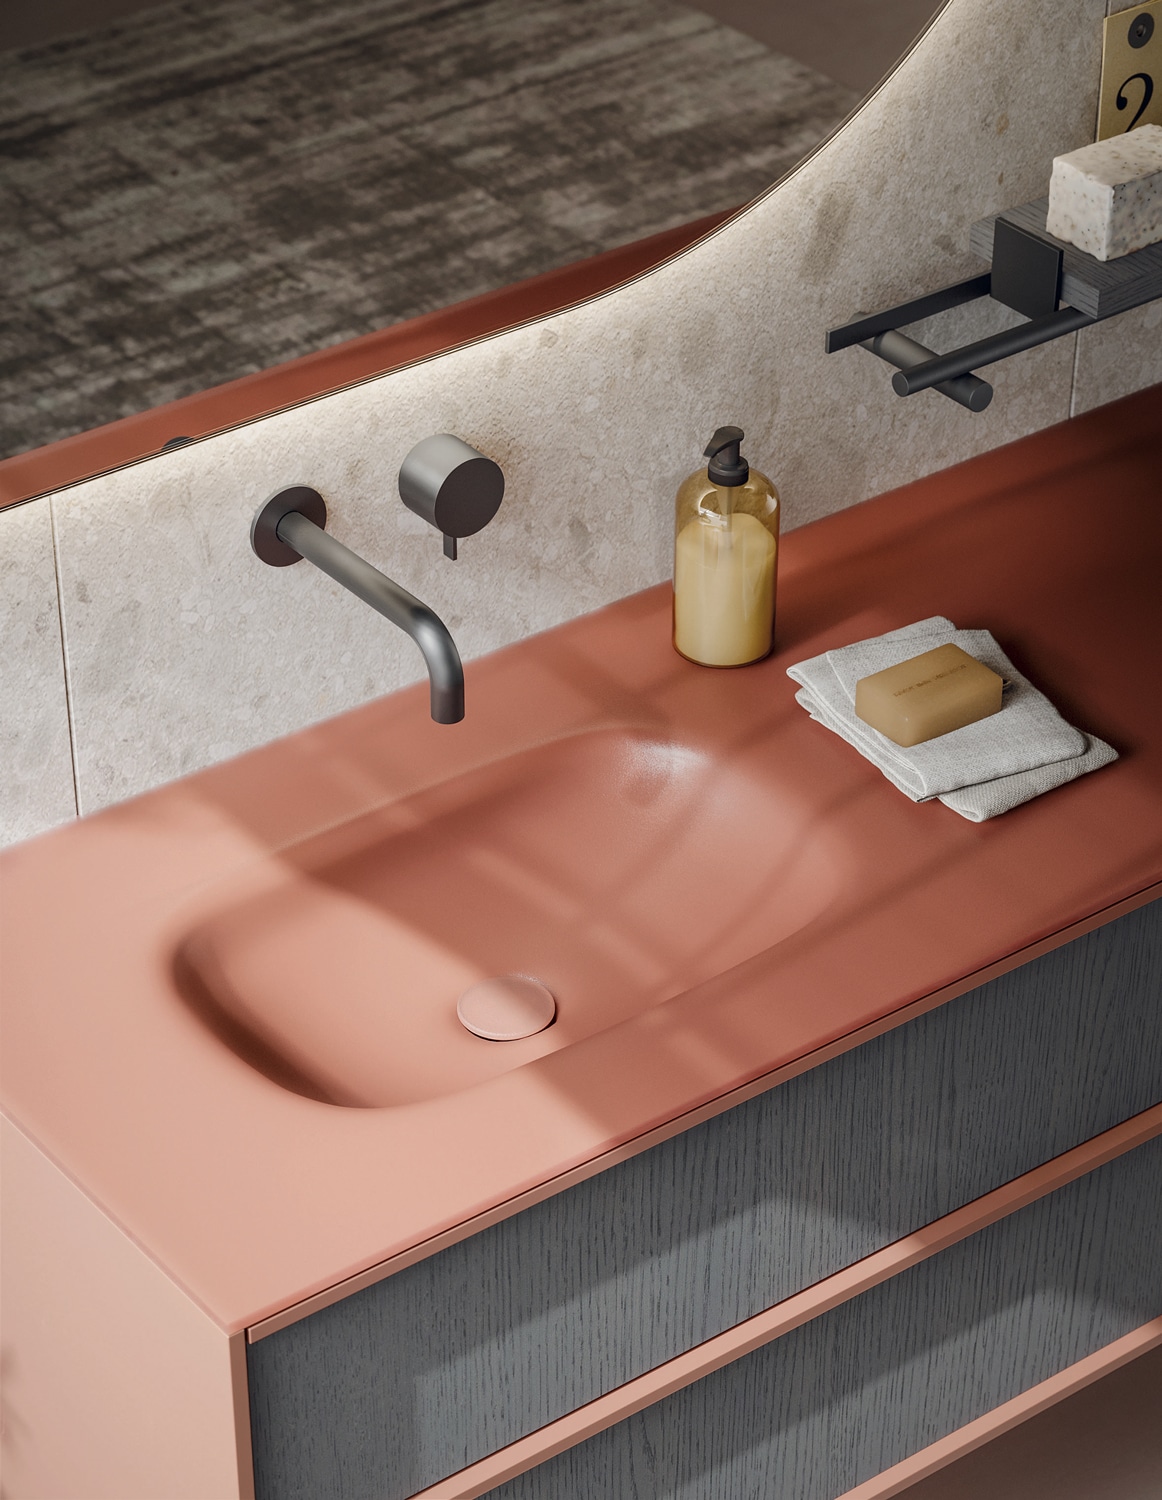 Detail of the vanity in Fumo oak wood with sides, frame, and integrated sink in Terracotta matte lacquer.